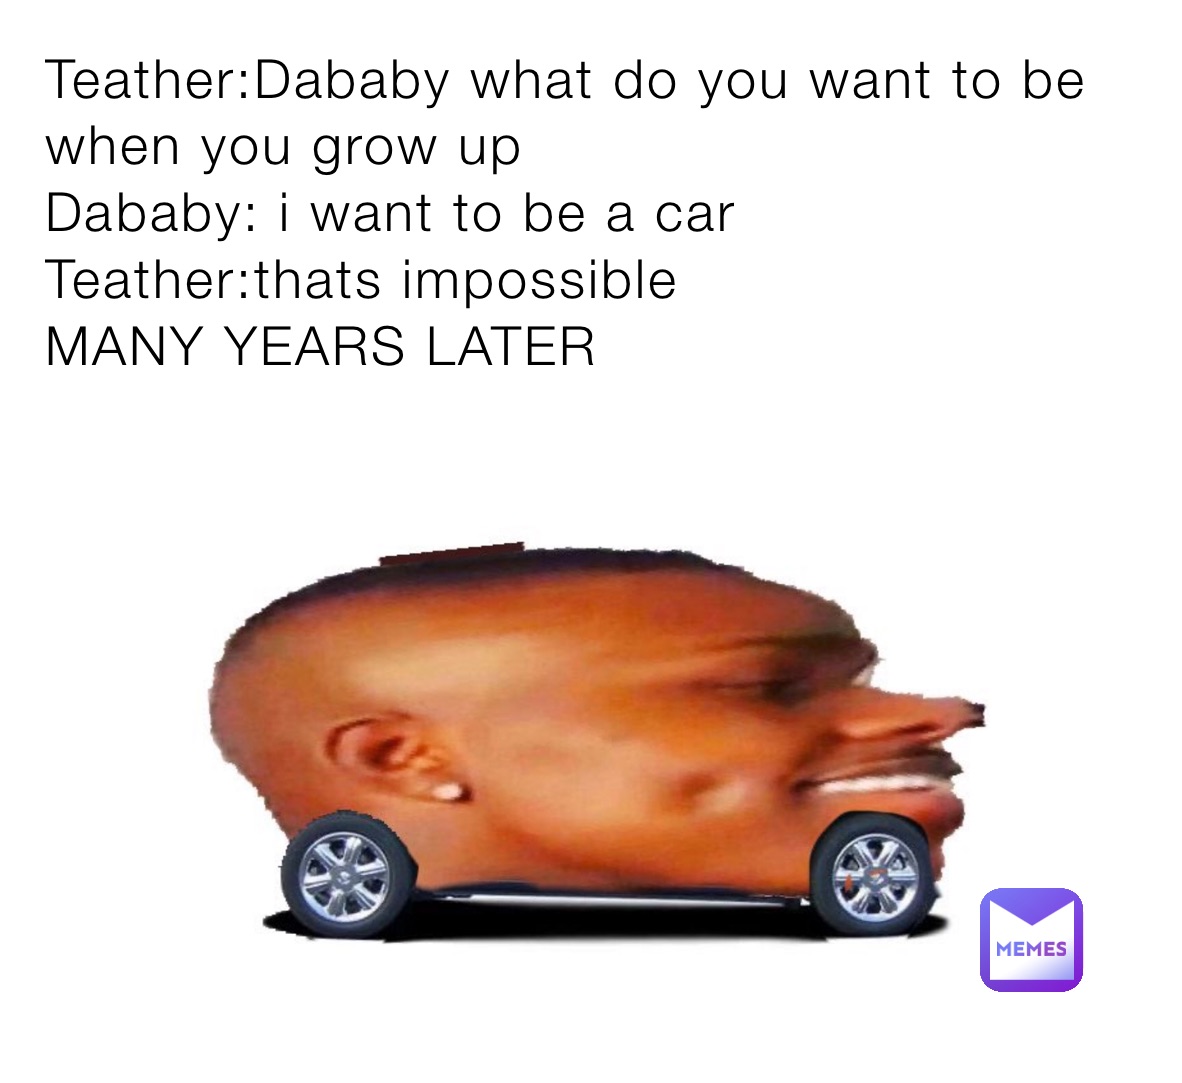 Teather:Dababy what do you want to be when you grow up
Dababy: i want to be a car
Teather:thats impossible
MANY YEARS LATER